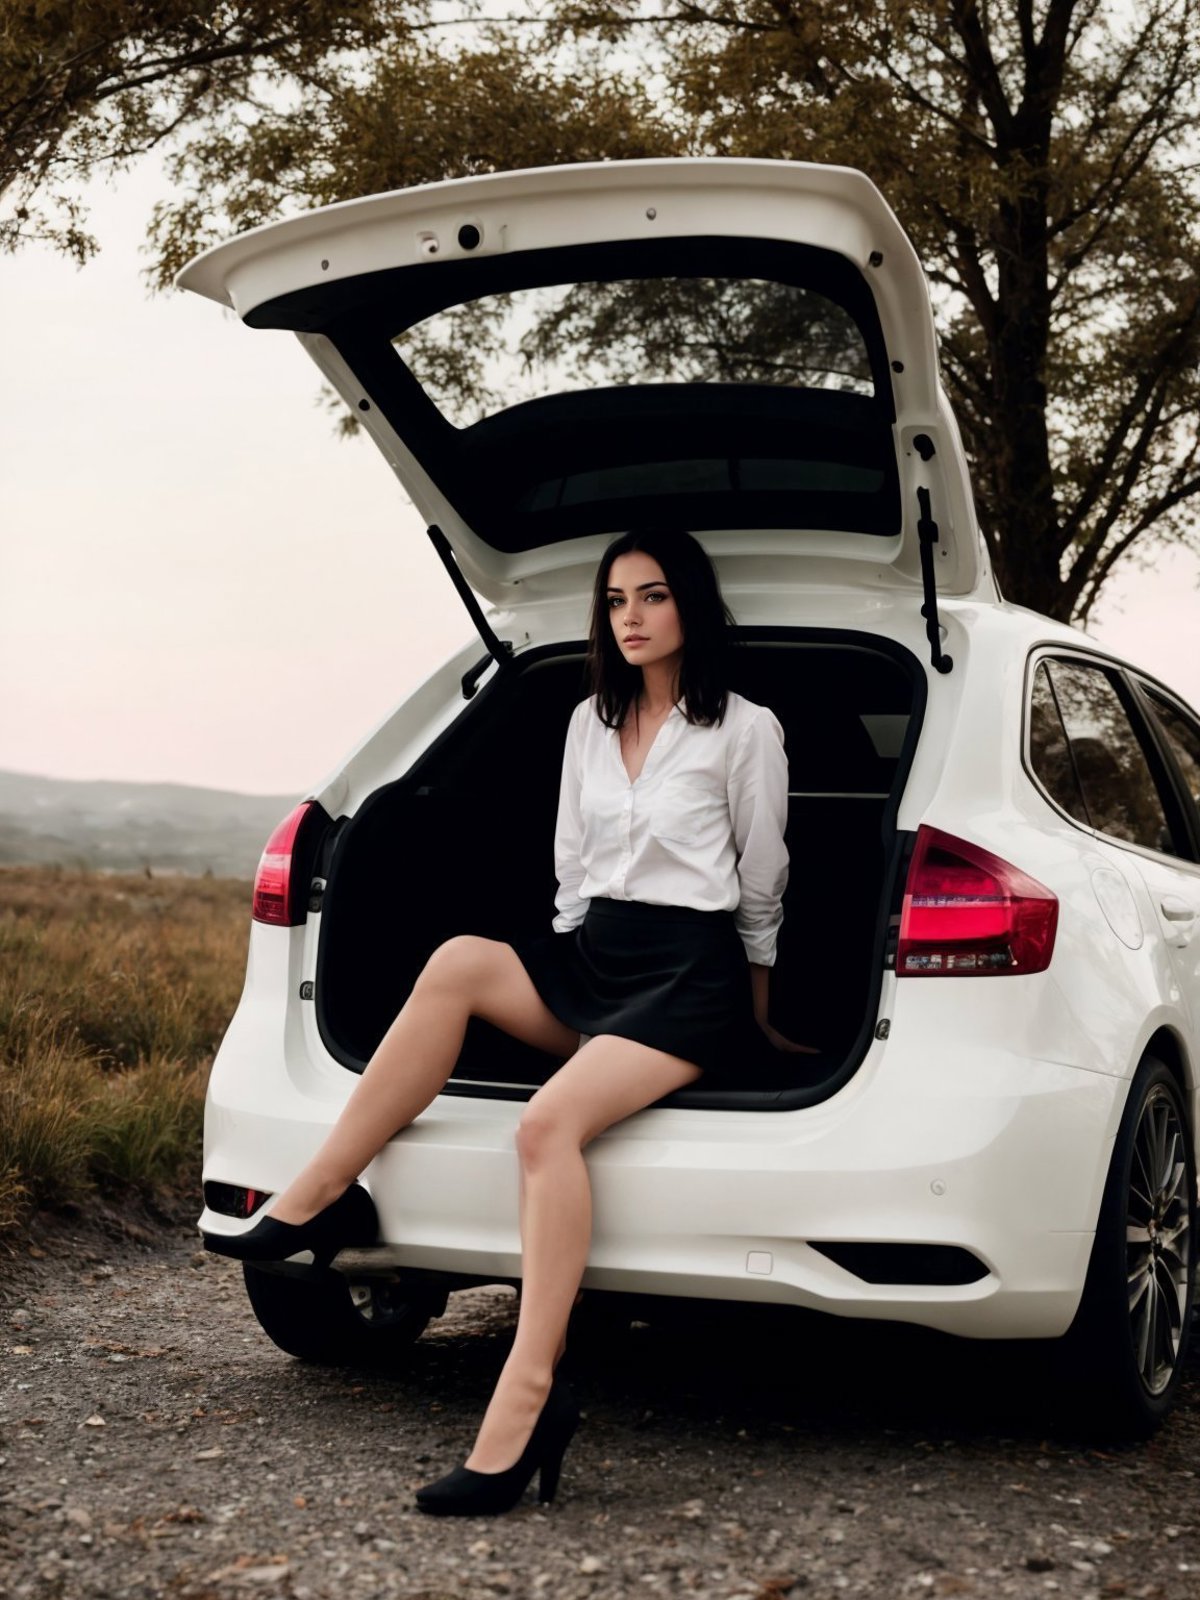 In The Trunk Sitting Concept image by ARTik_31